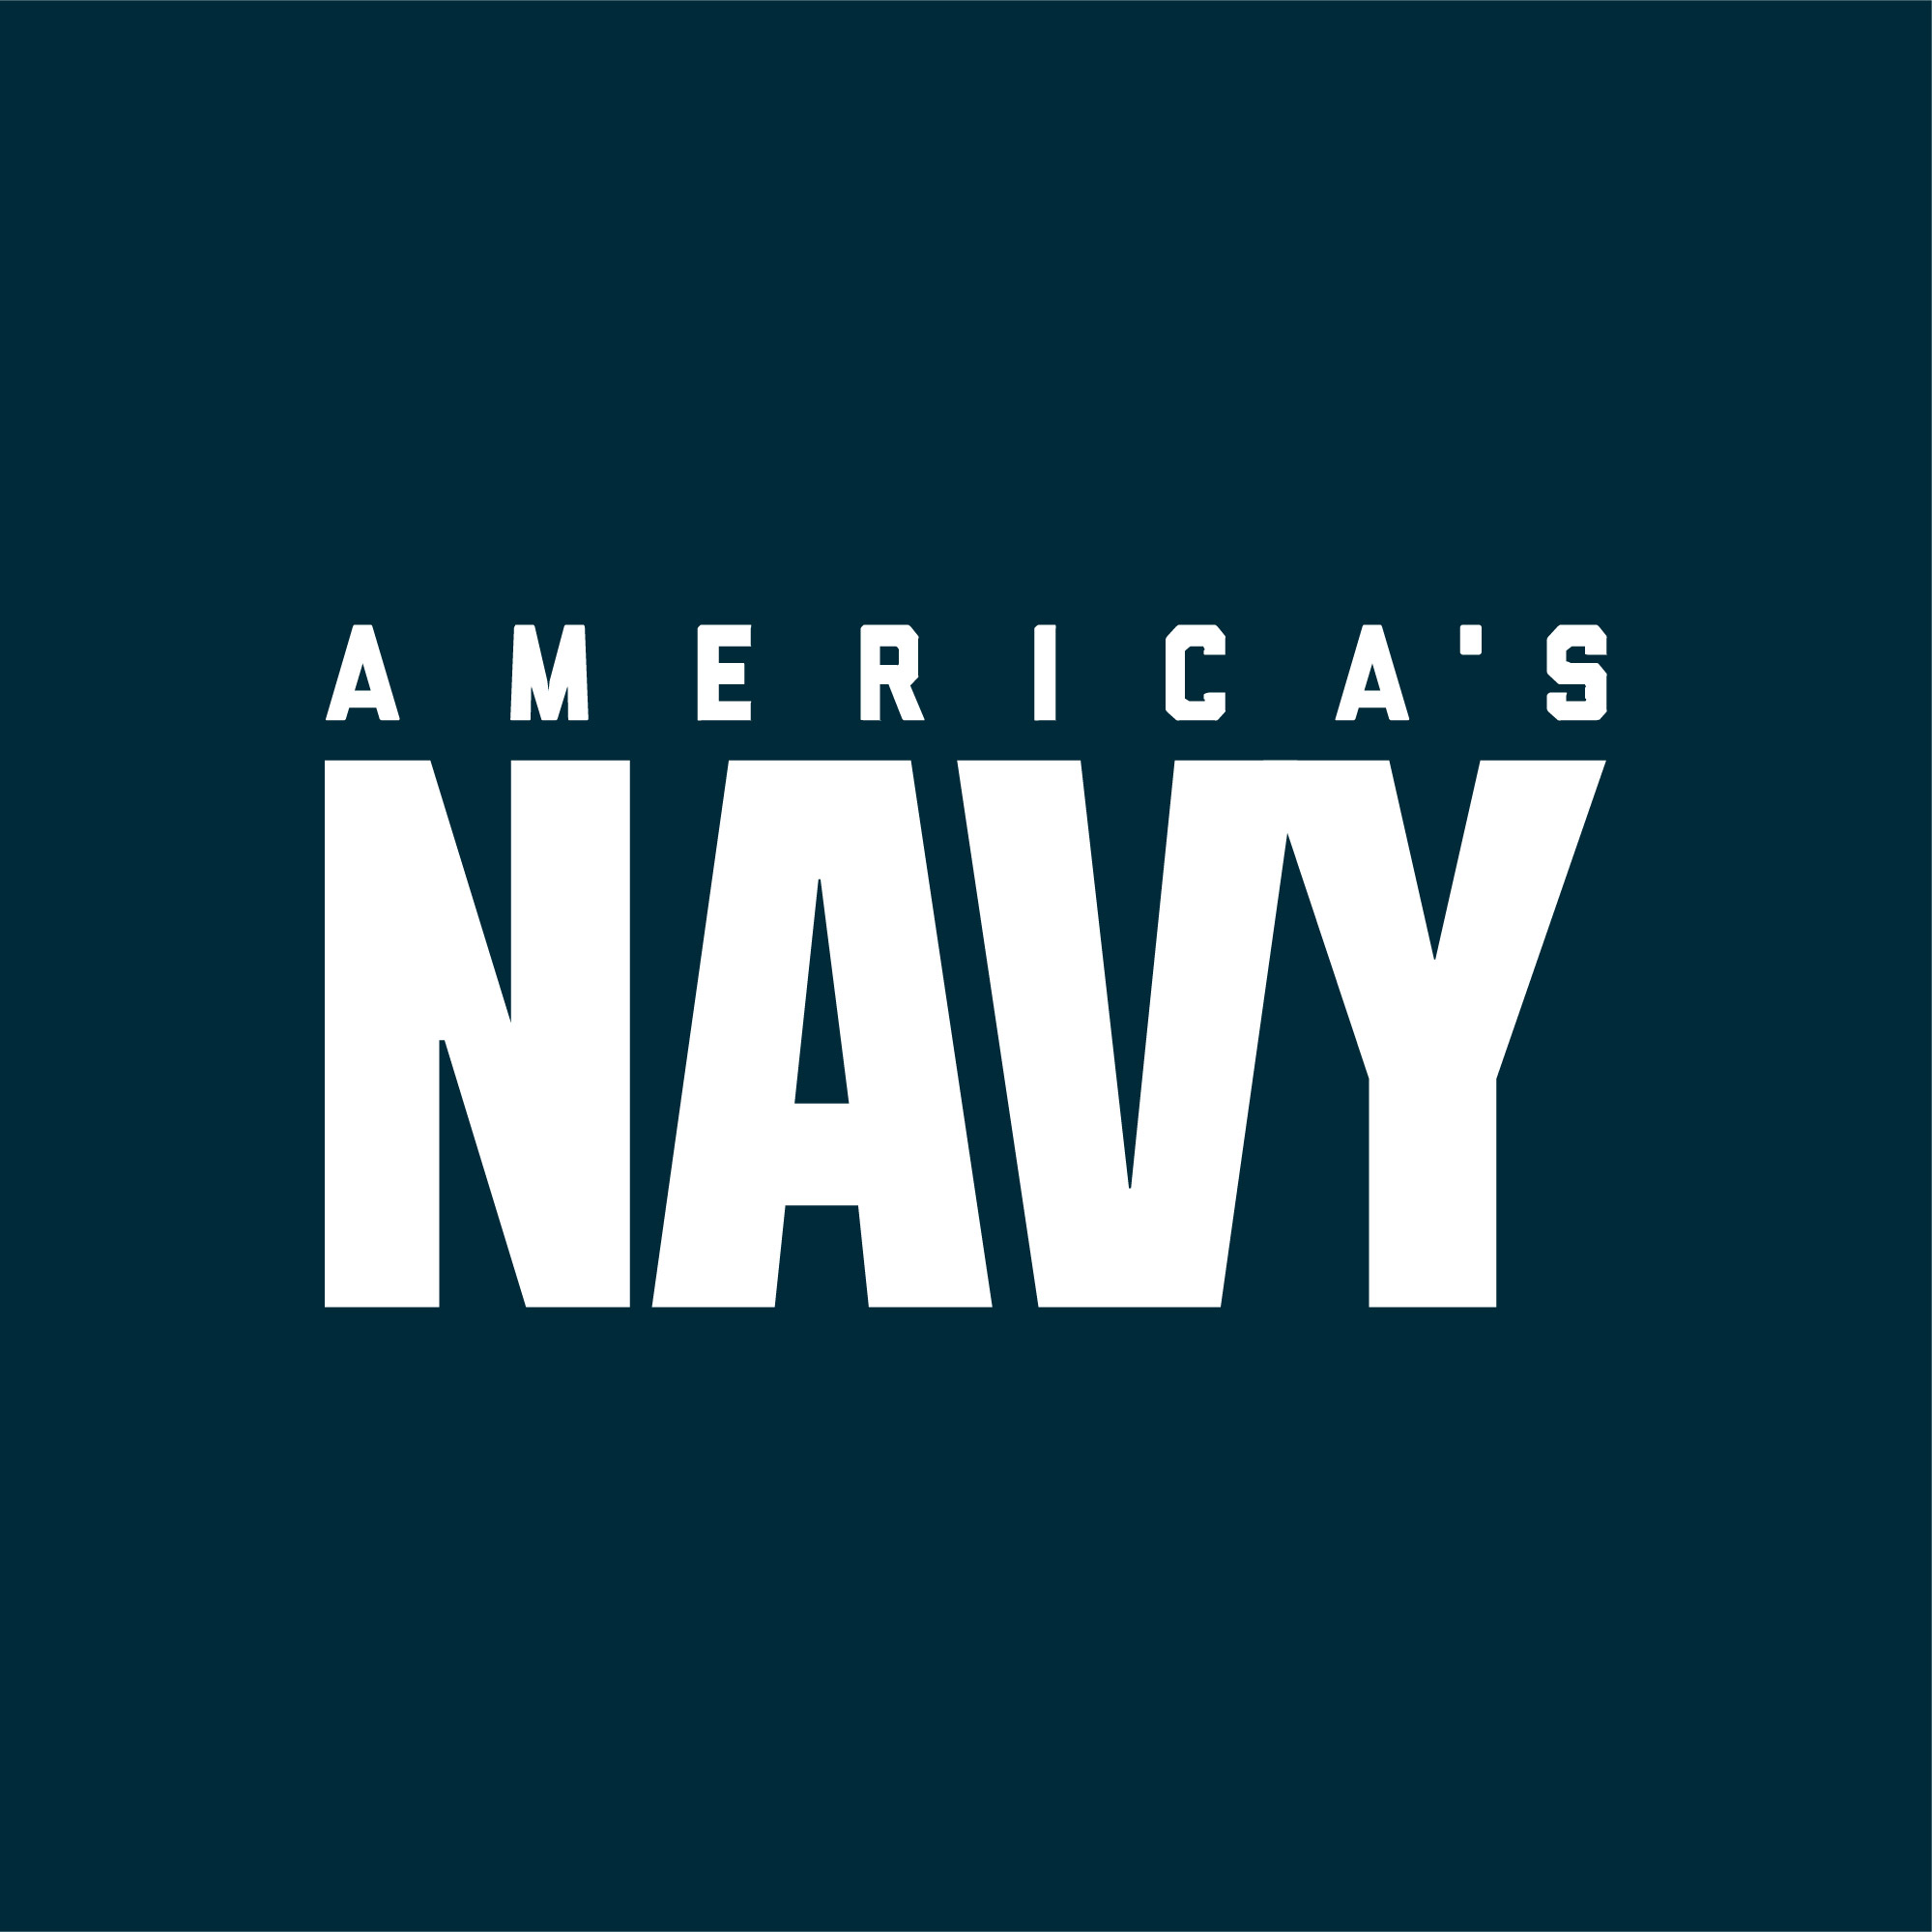 America's Navy Logo in white and navy blue background